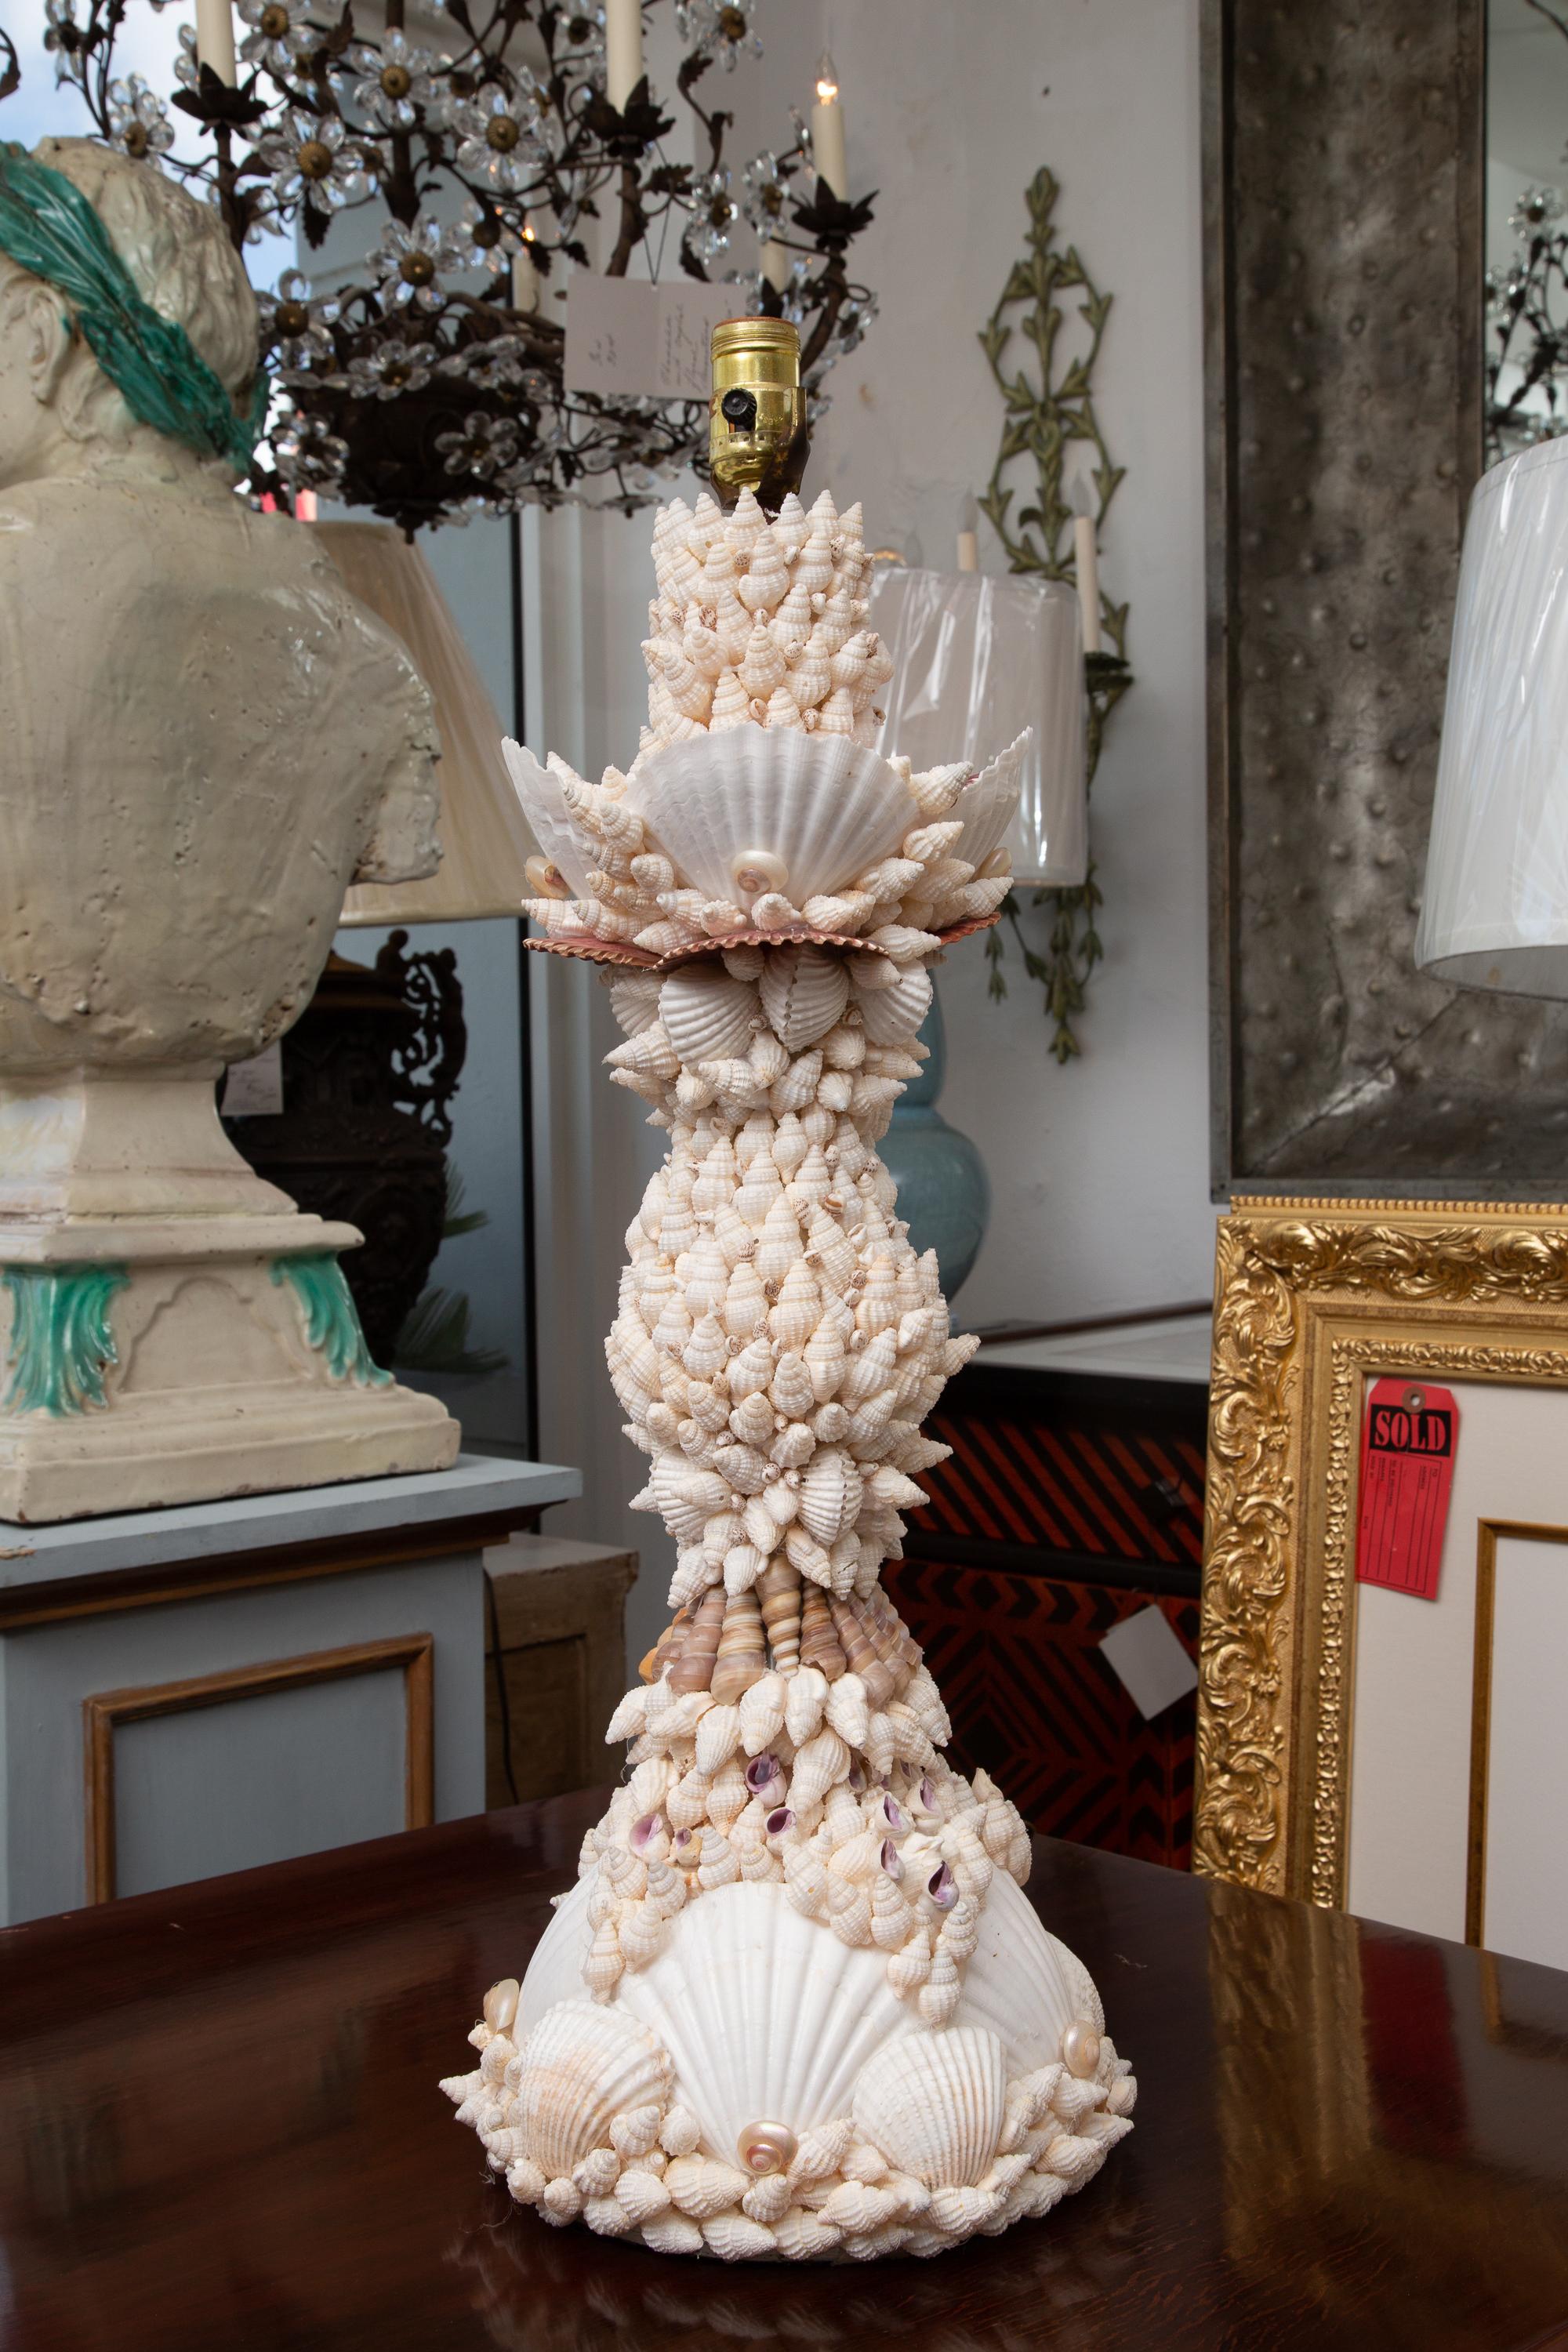 This is a pair of custom table lamps, encrusted overall with a variety of shells. 20th century.